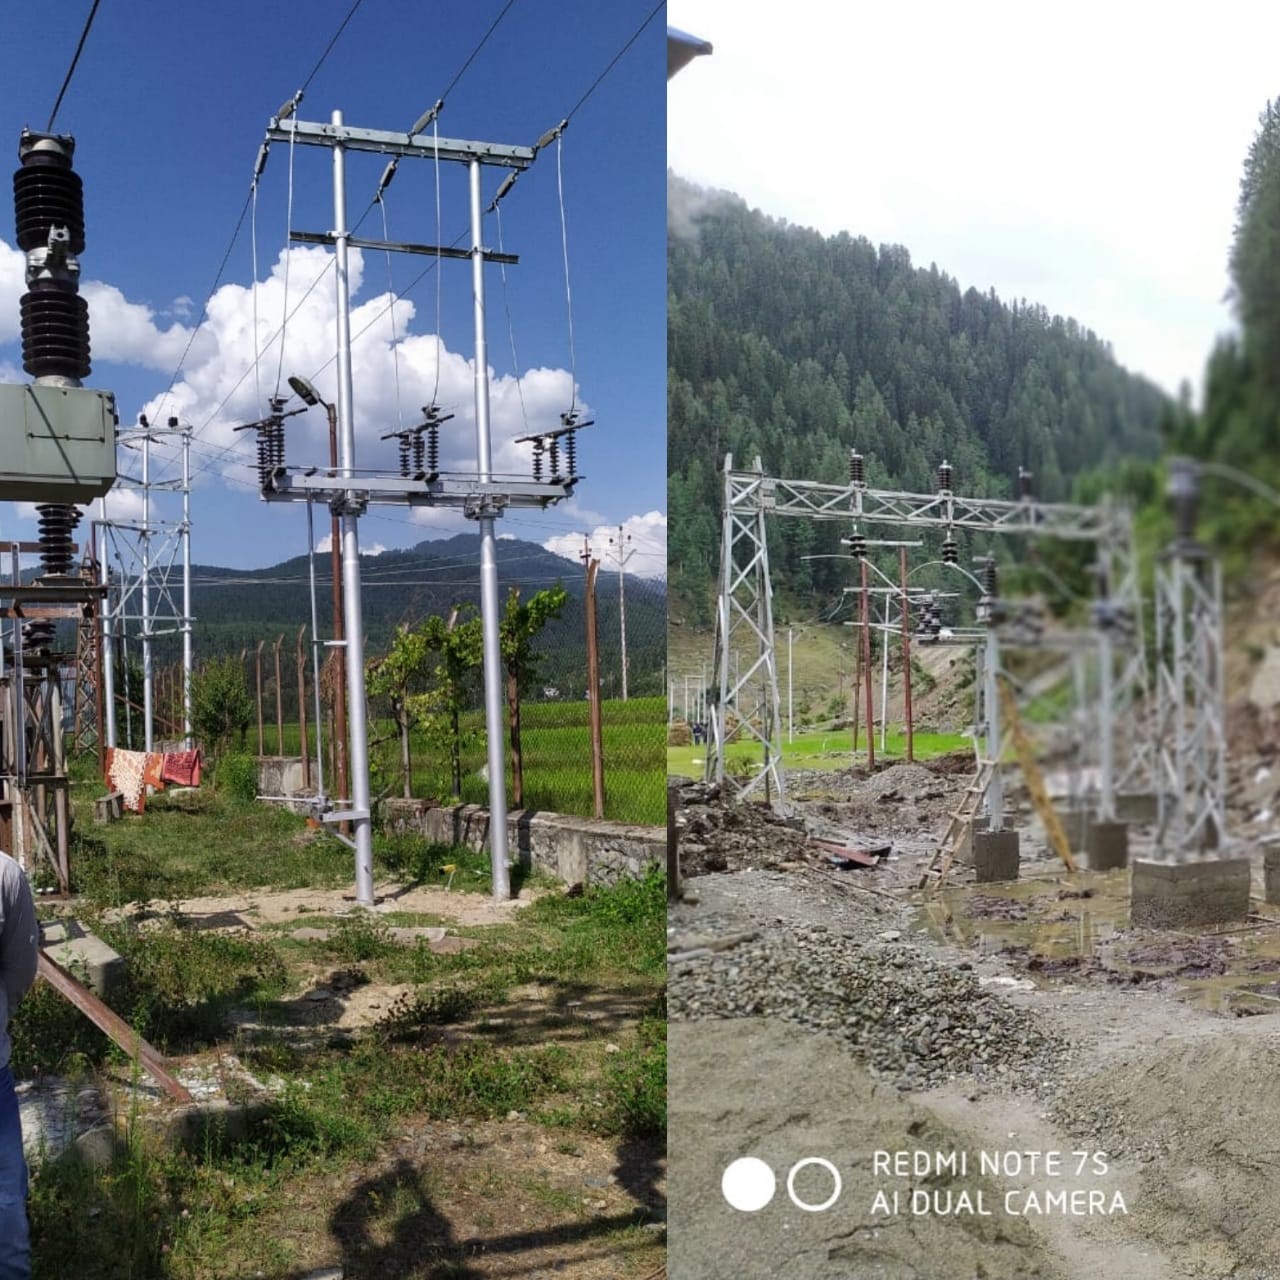 Kashmir Power achievement: Machil gets Electricity from grid first time since 1947